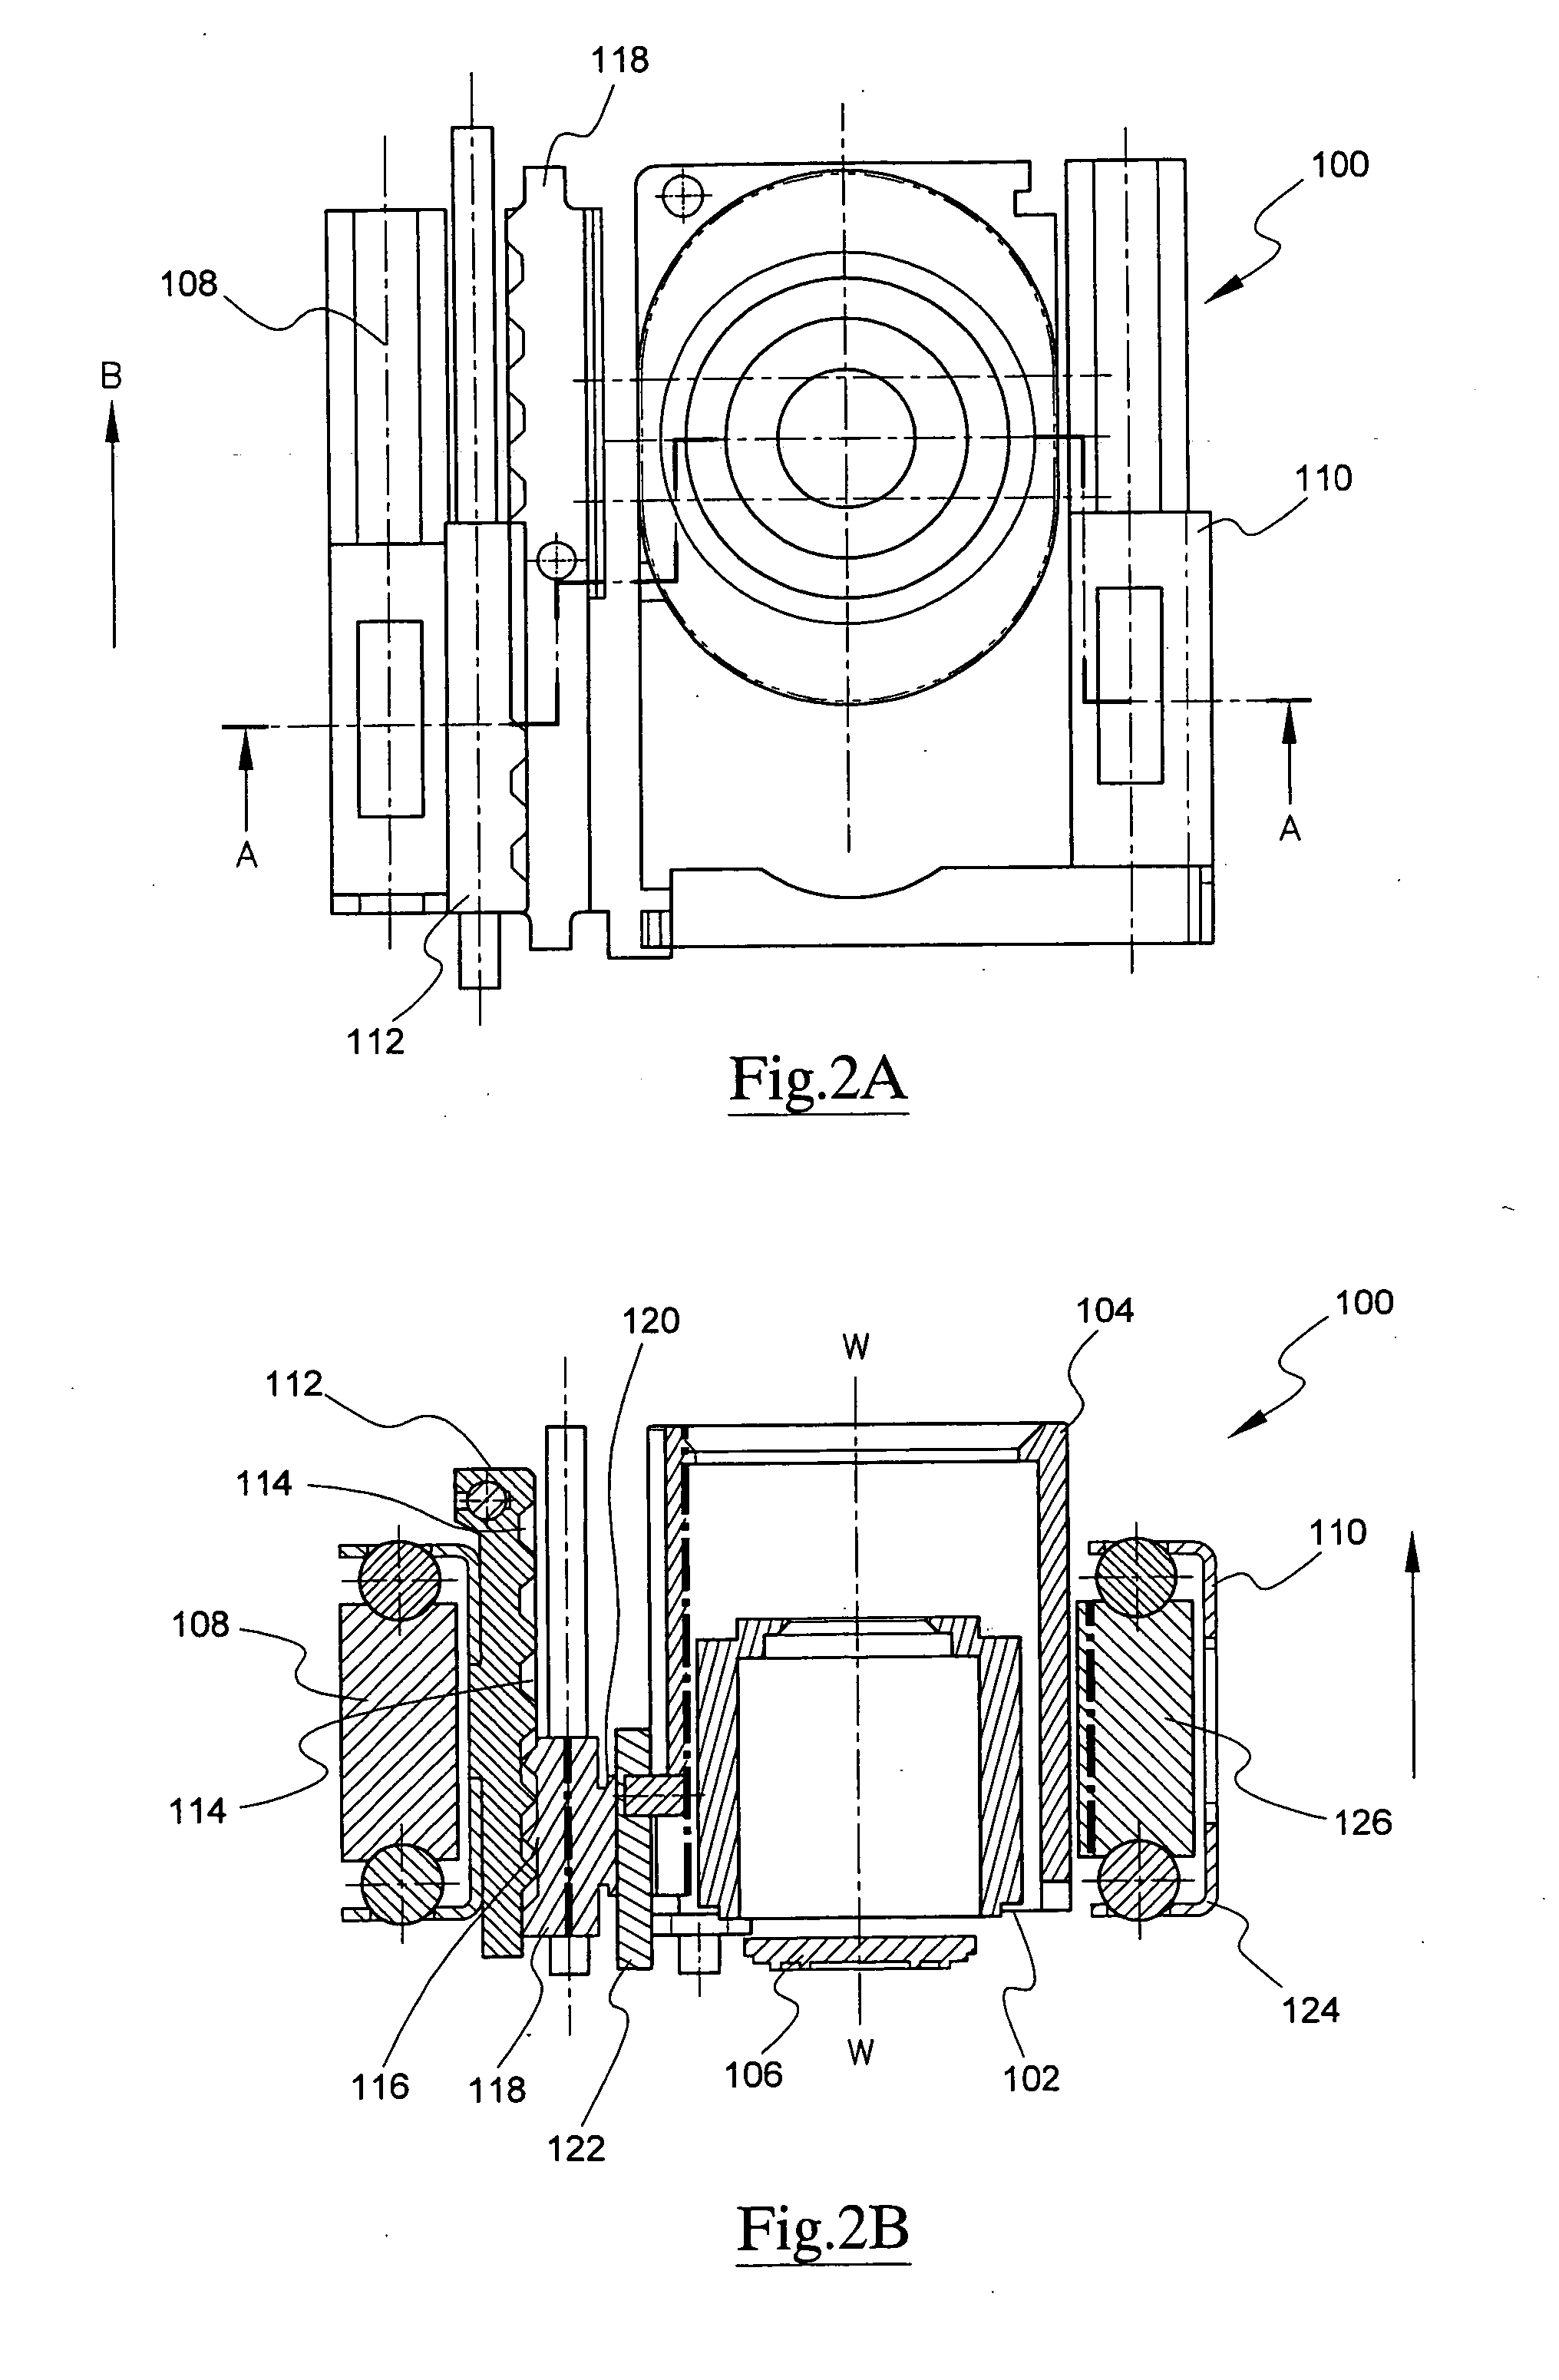 Optical lens assembly for a handheld electronic device